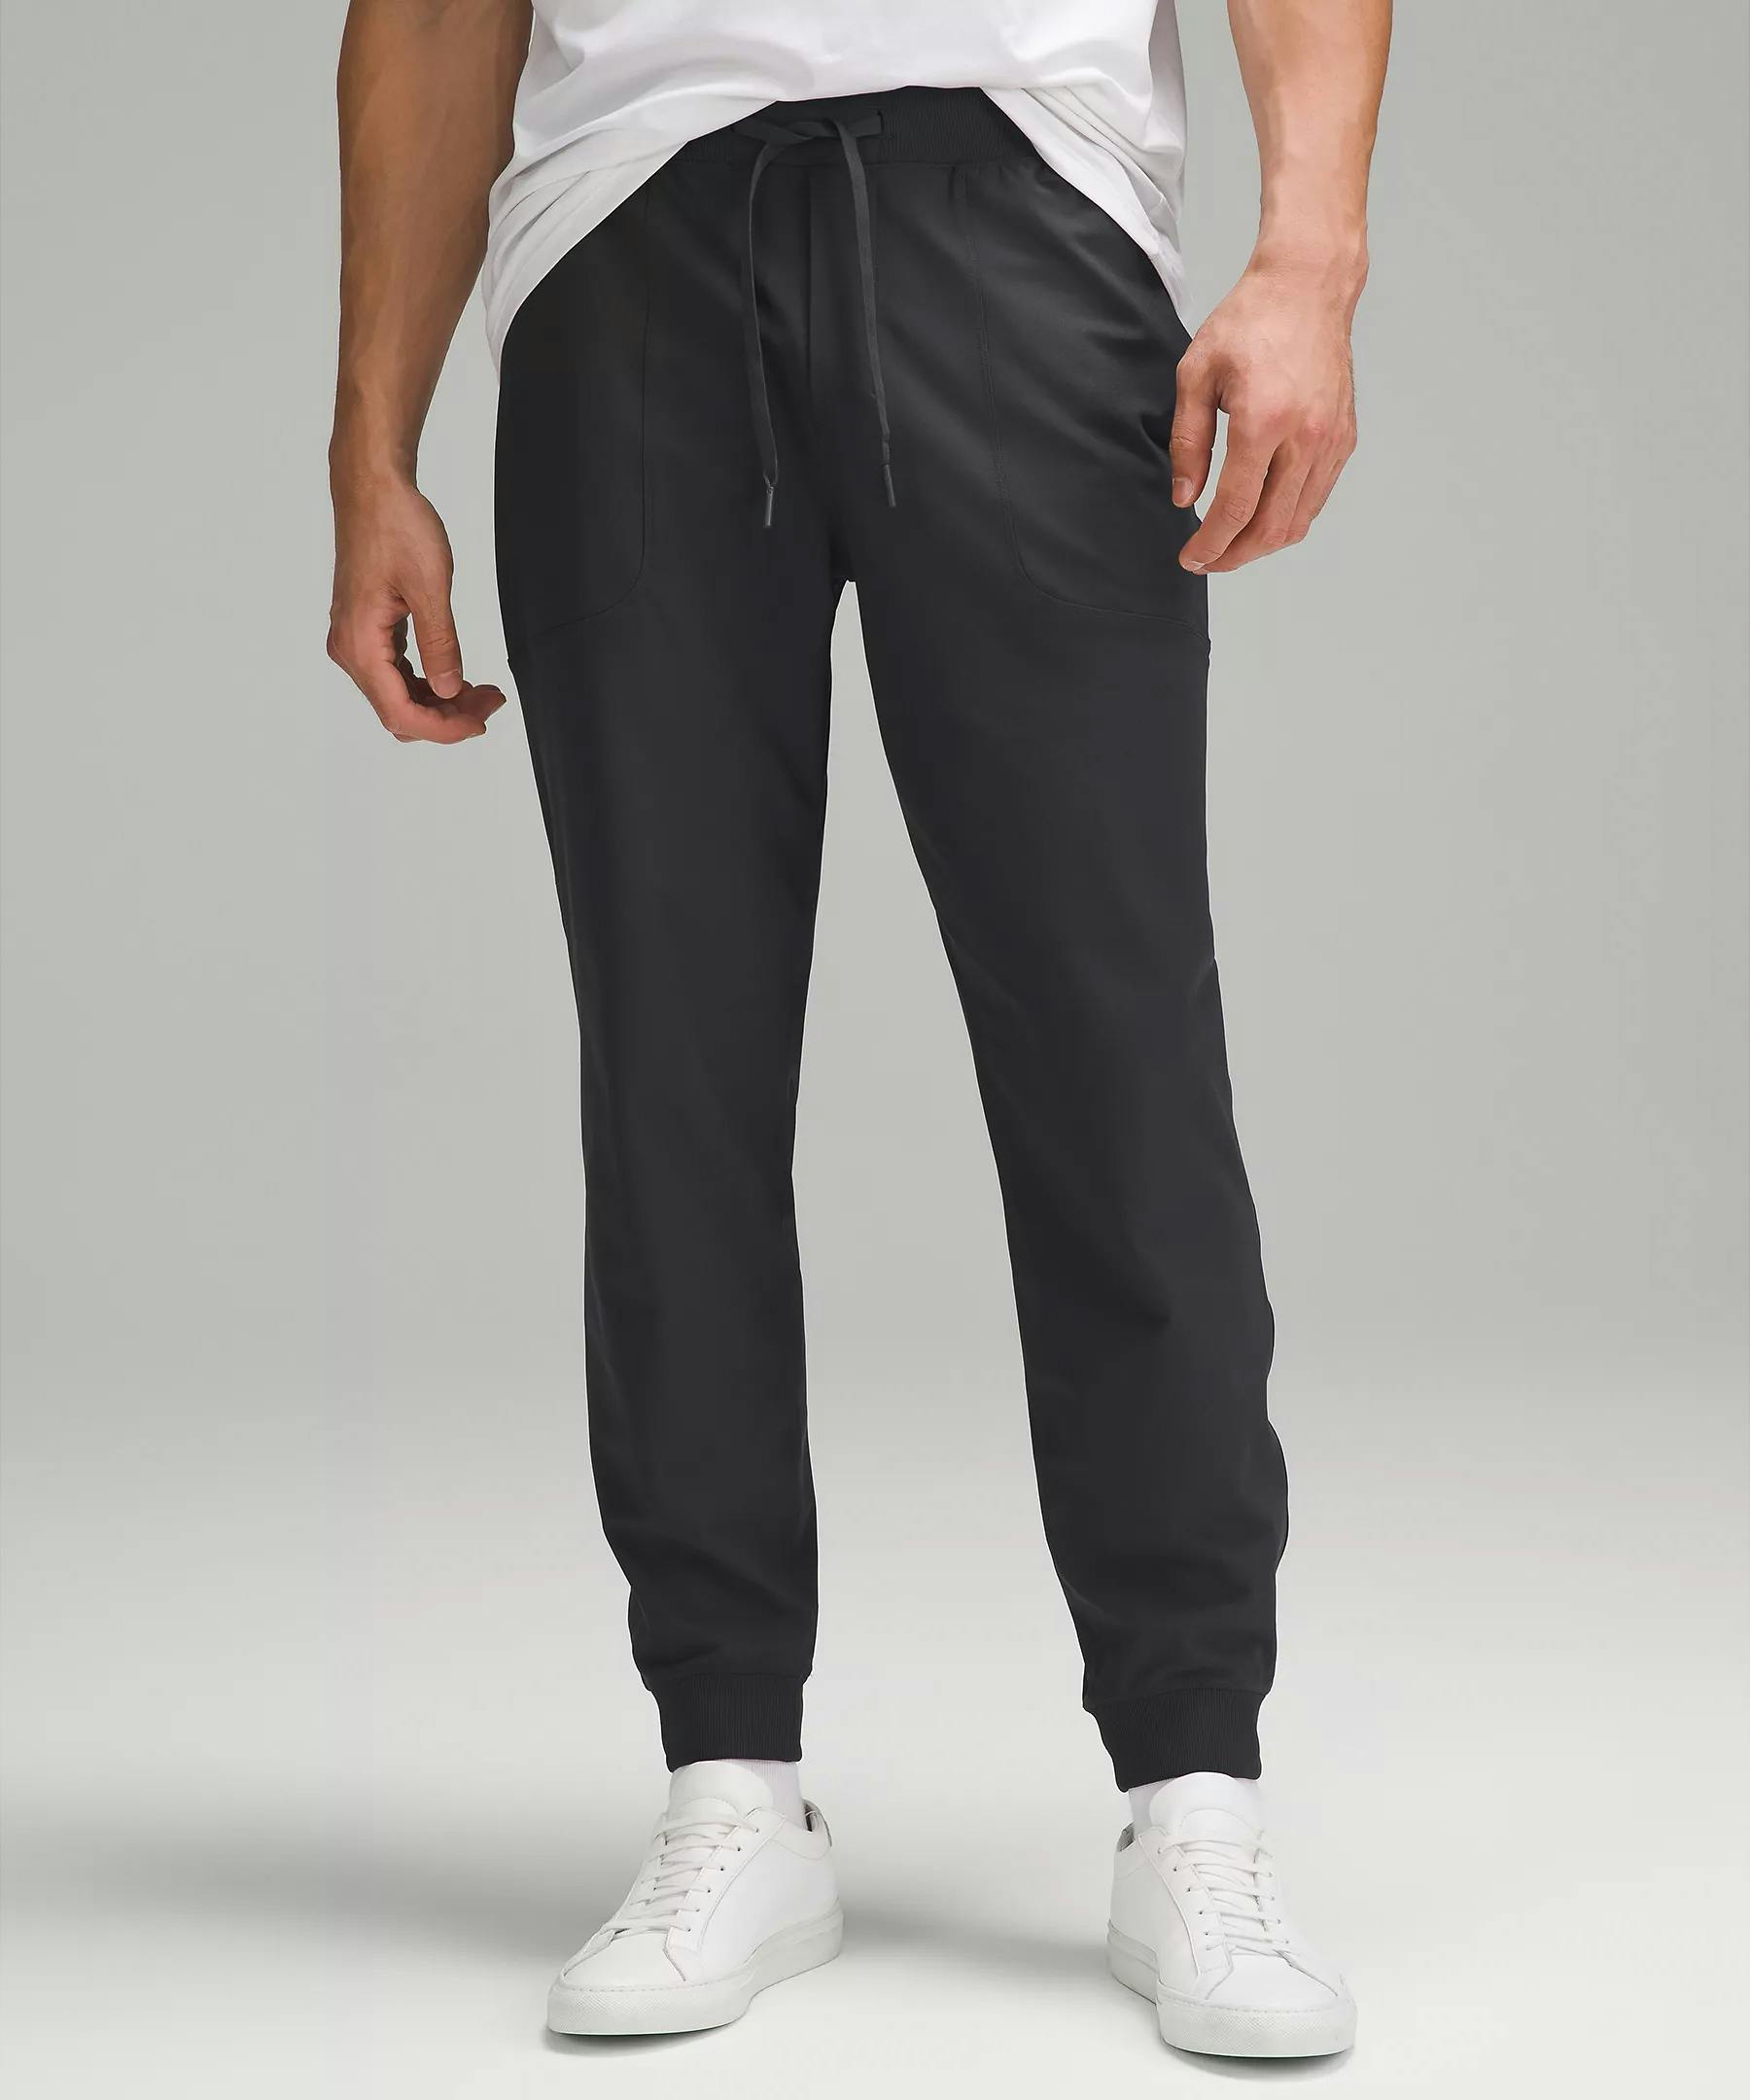 Men's Utility Tapered Jogger Pants - All in Motion™ Black XL